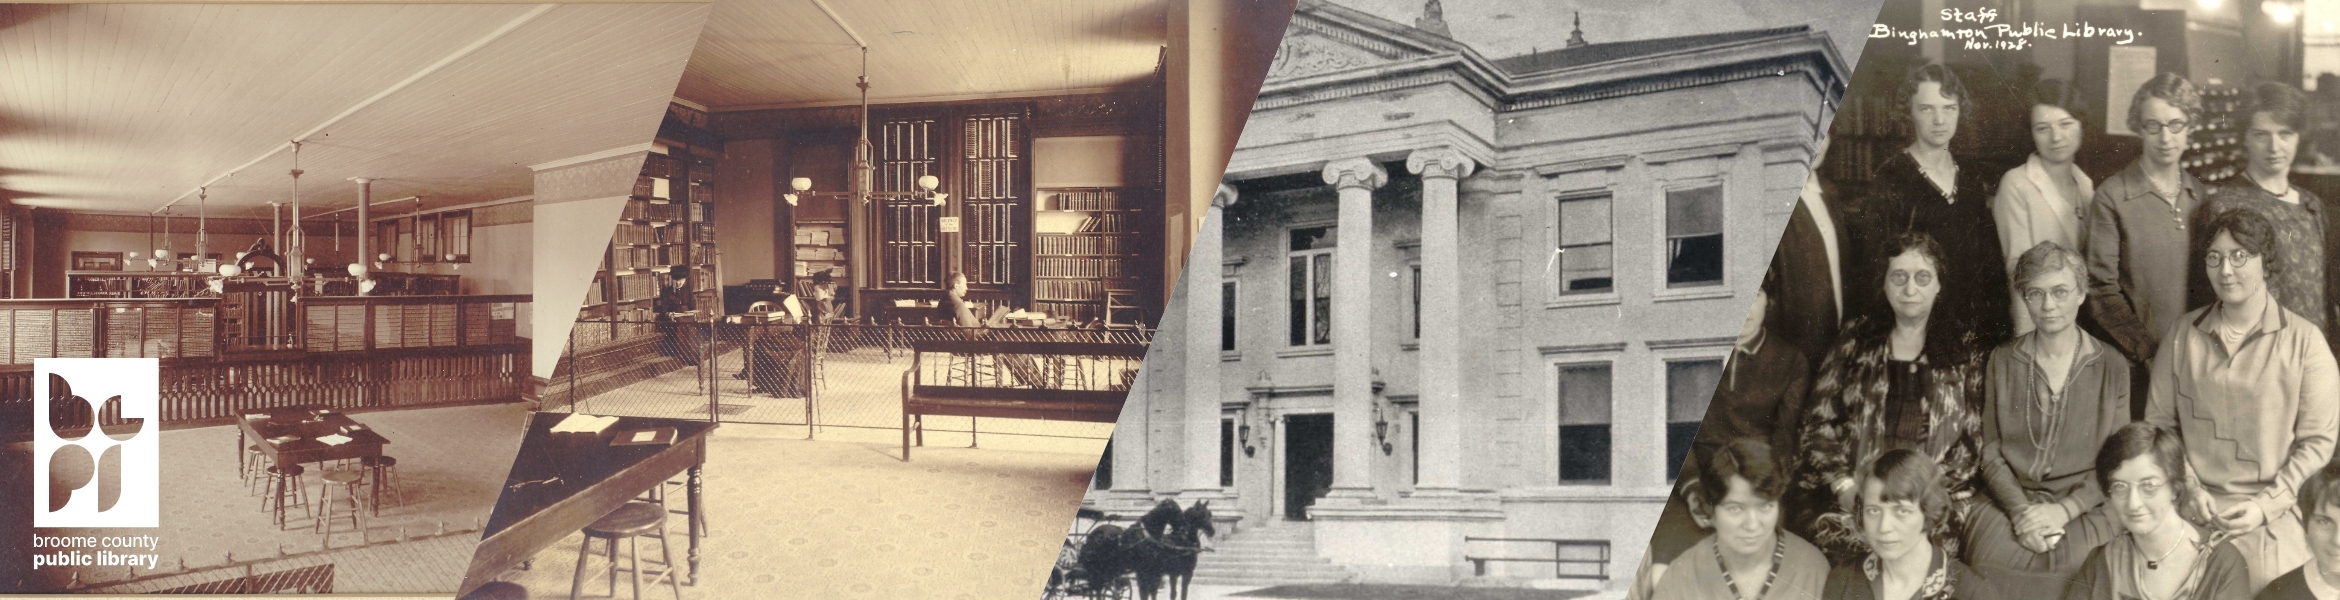 Library History Collage Header showing four separate images, three sepia and one black and white, of the library through the years